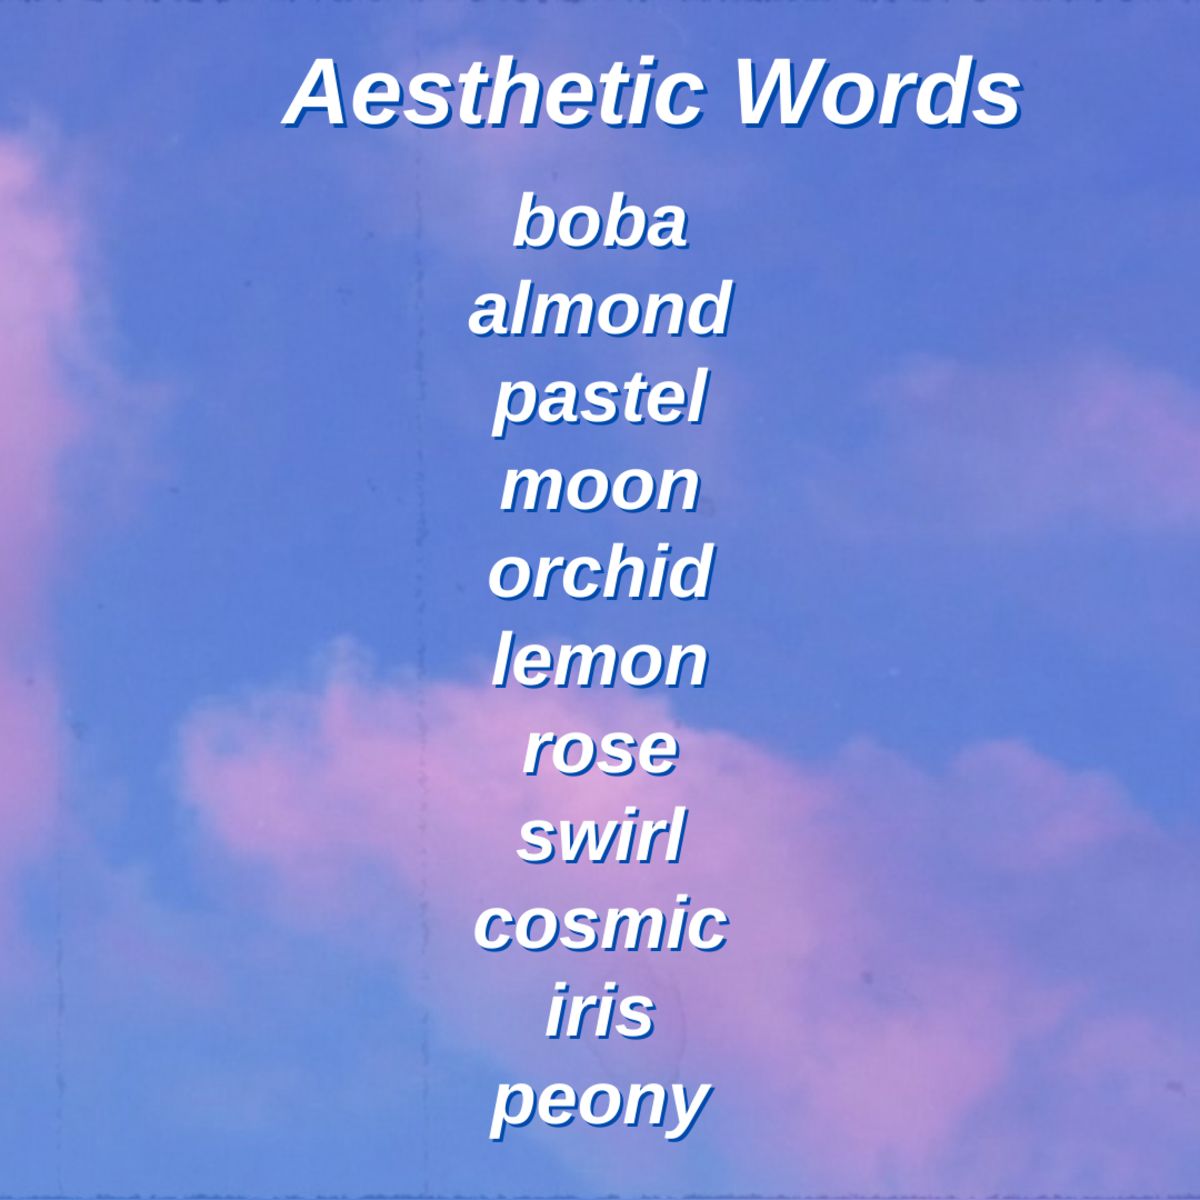 Here are some aesthetic word ideas to inspire you!